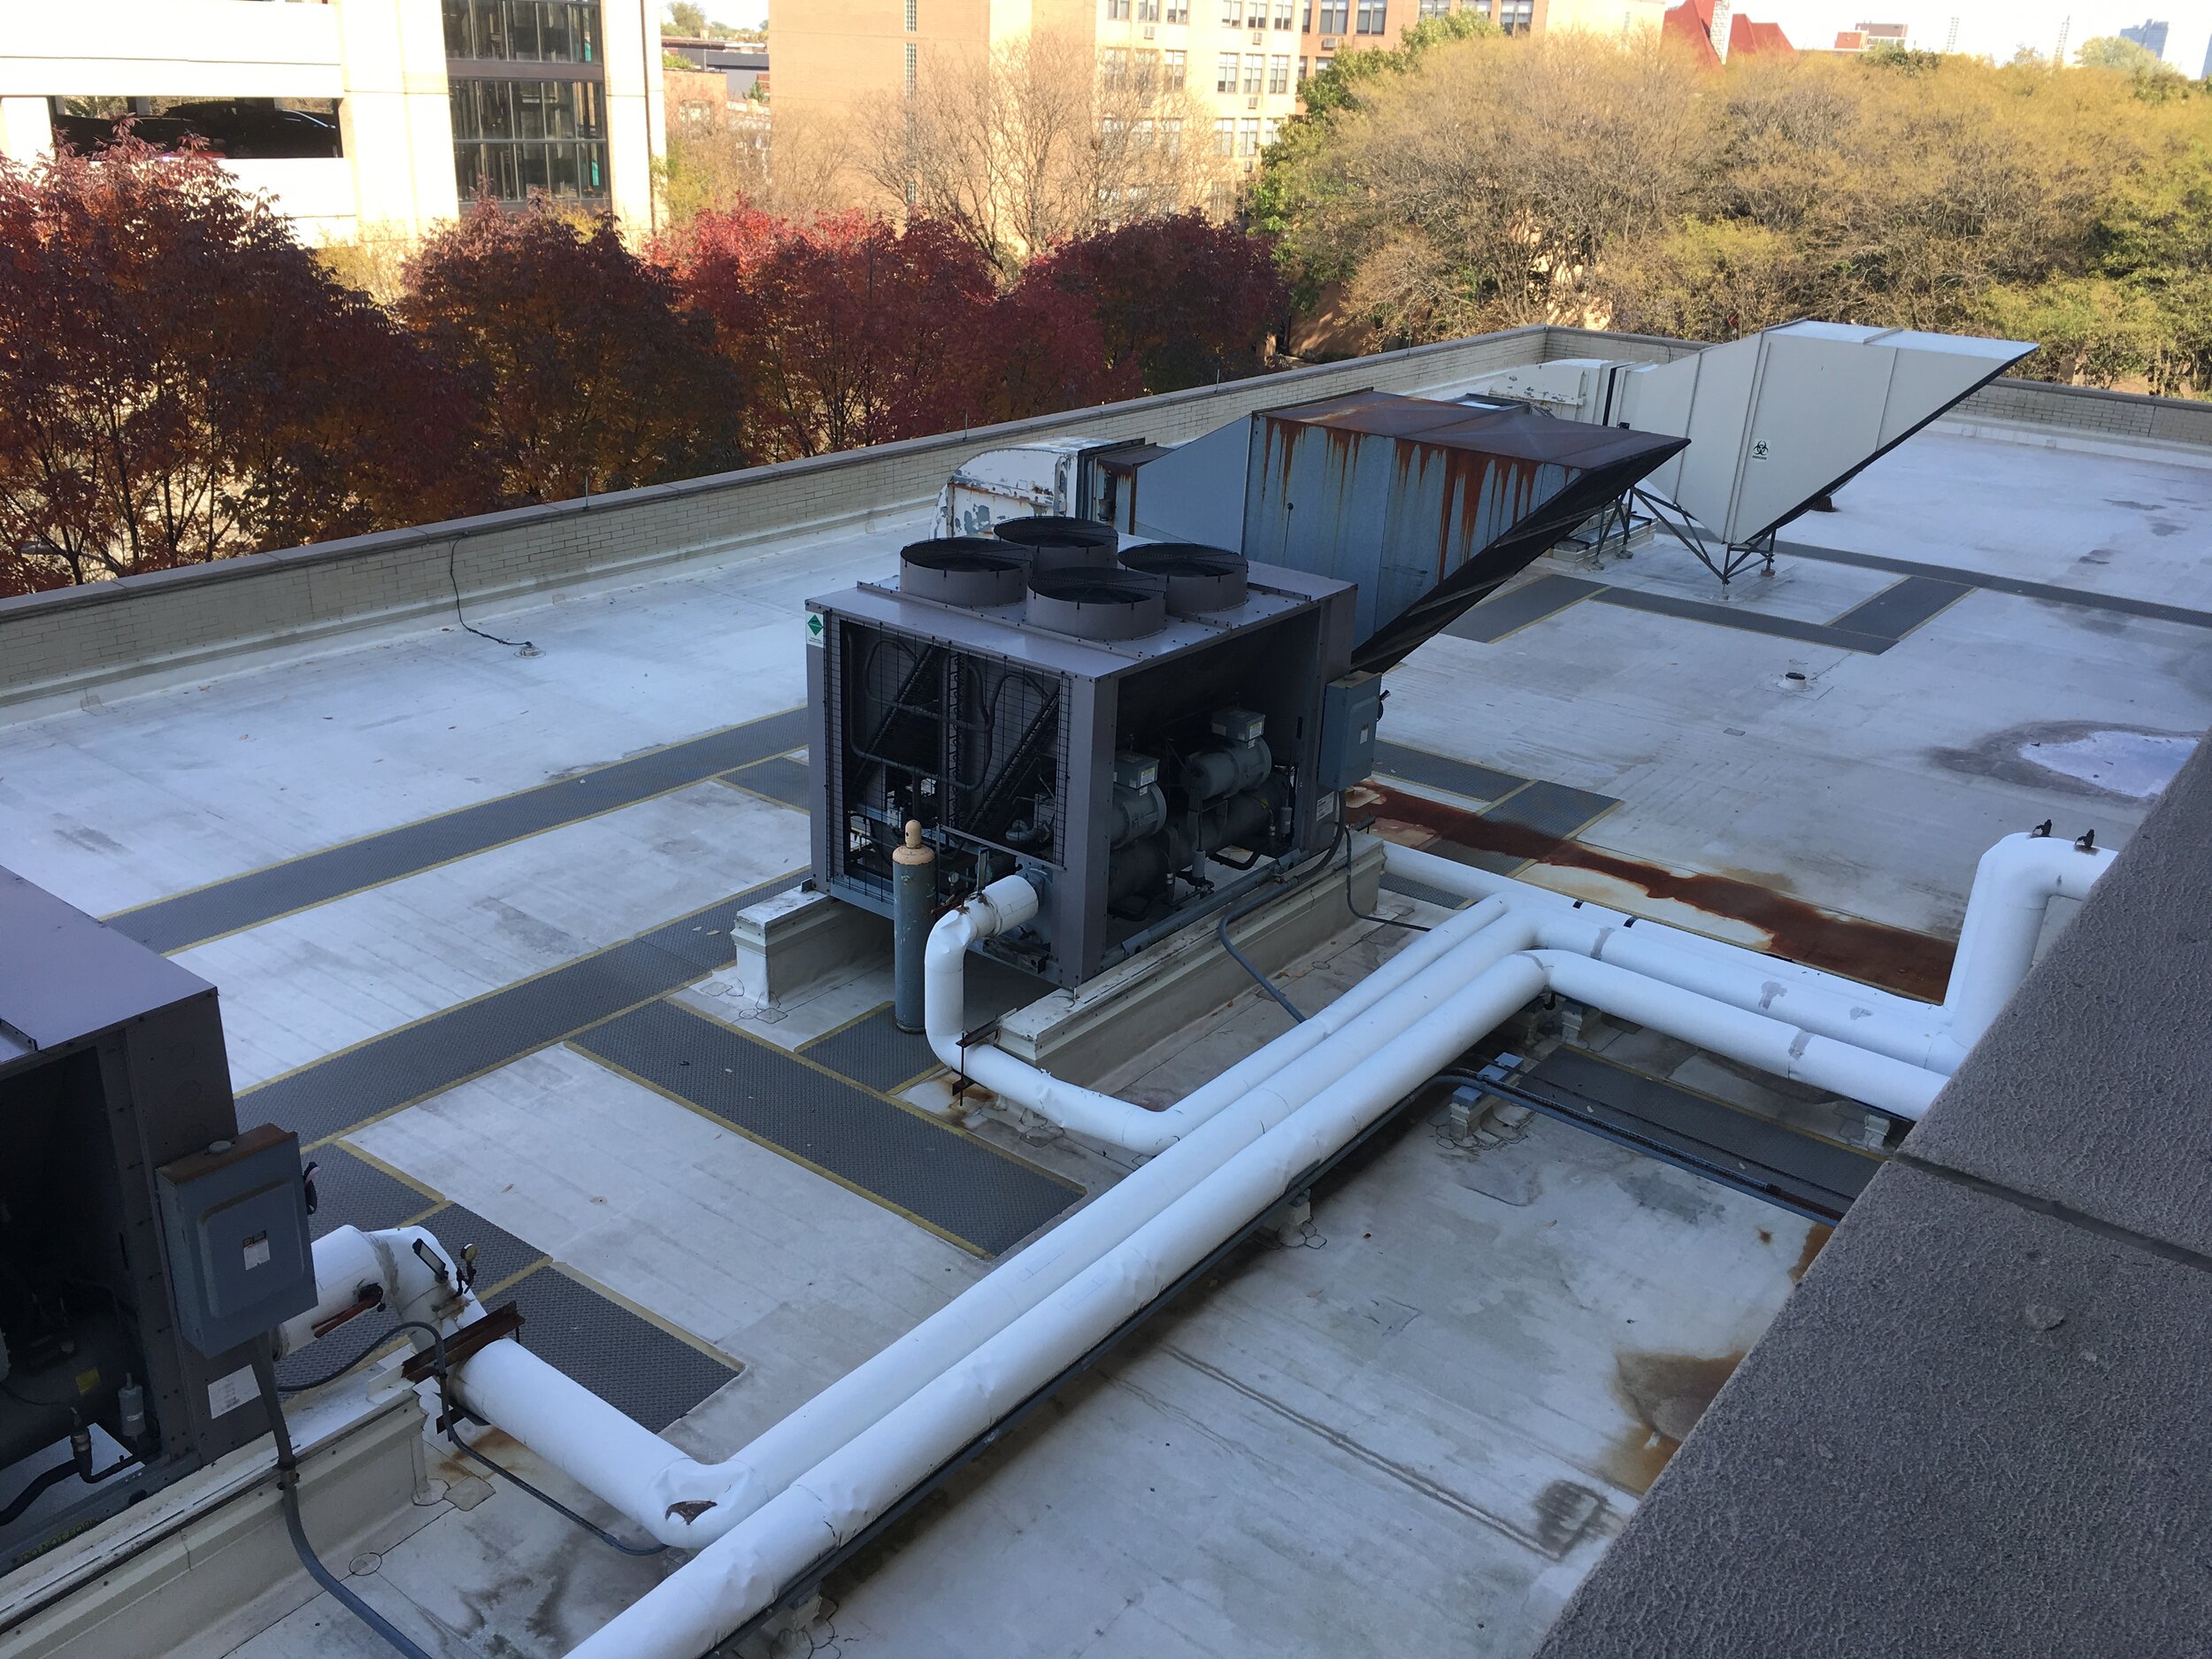 Provident Hospital Chiller and HVAC System Upgrade - Cook County Job Order Contract 2.JPG